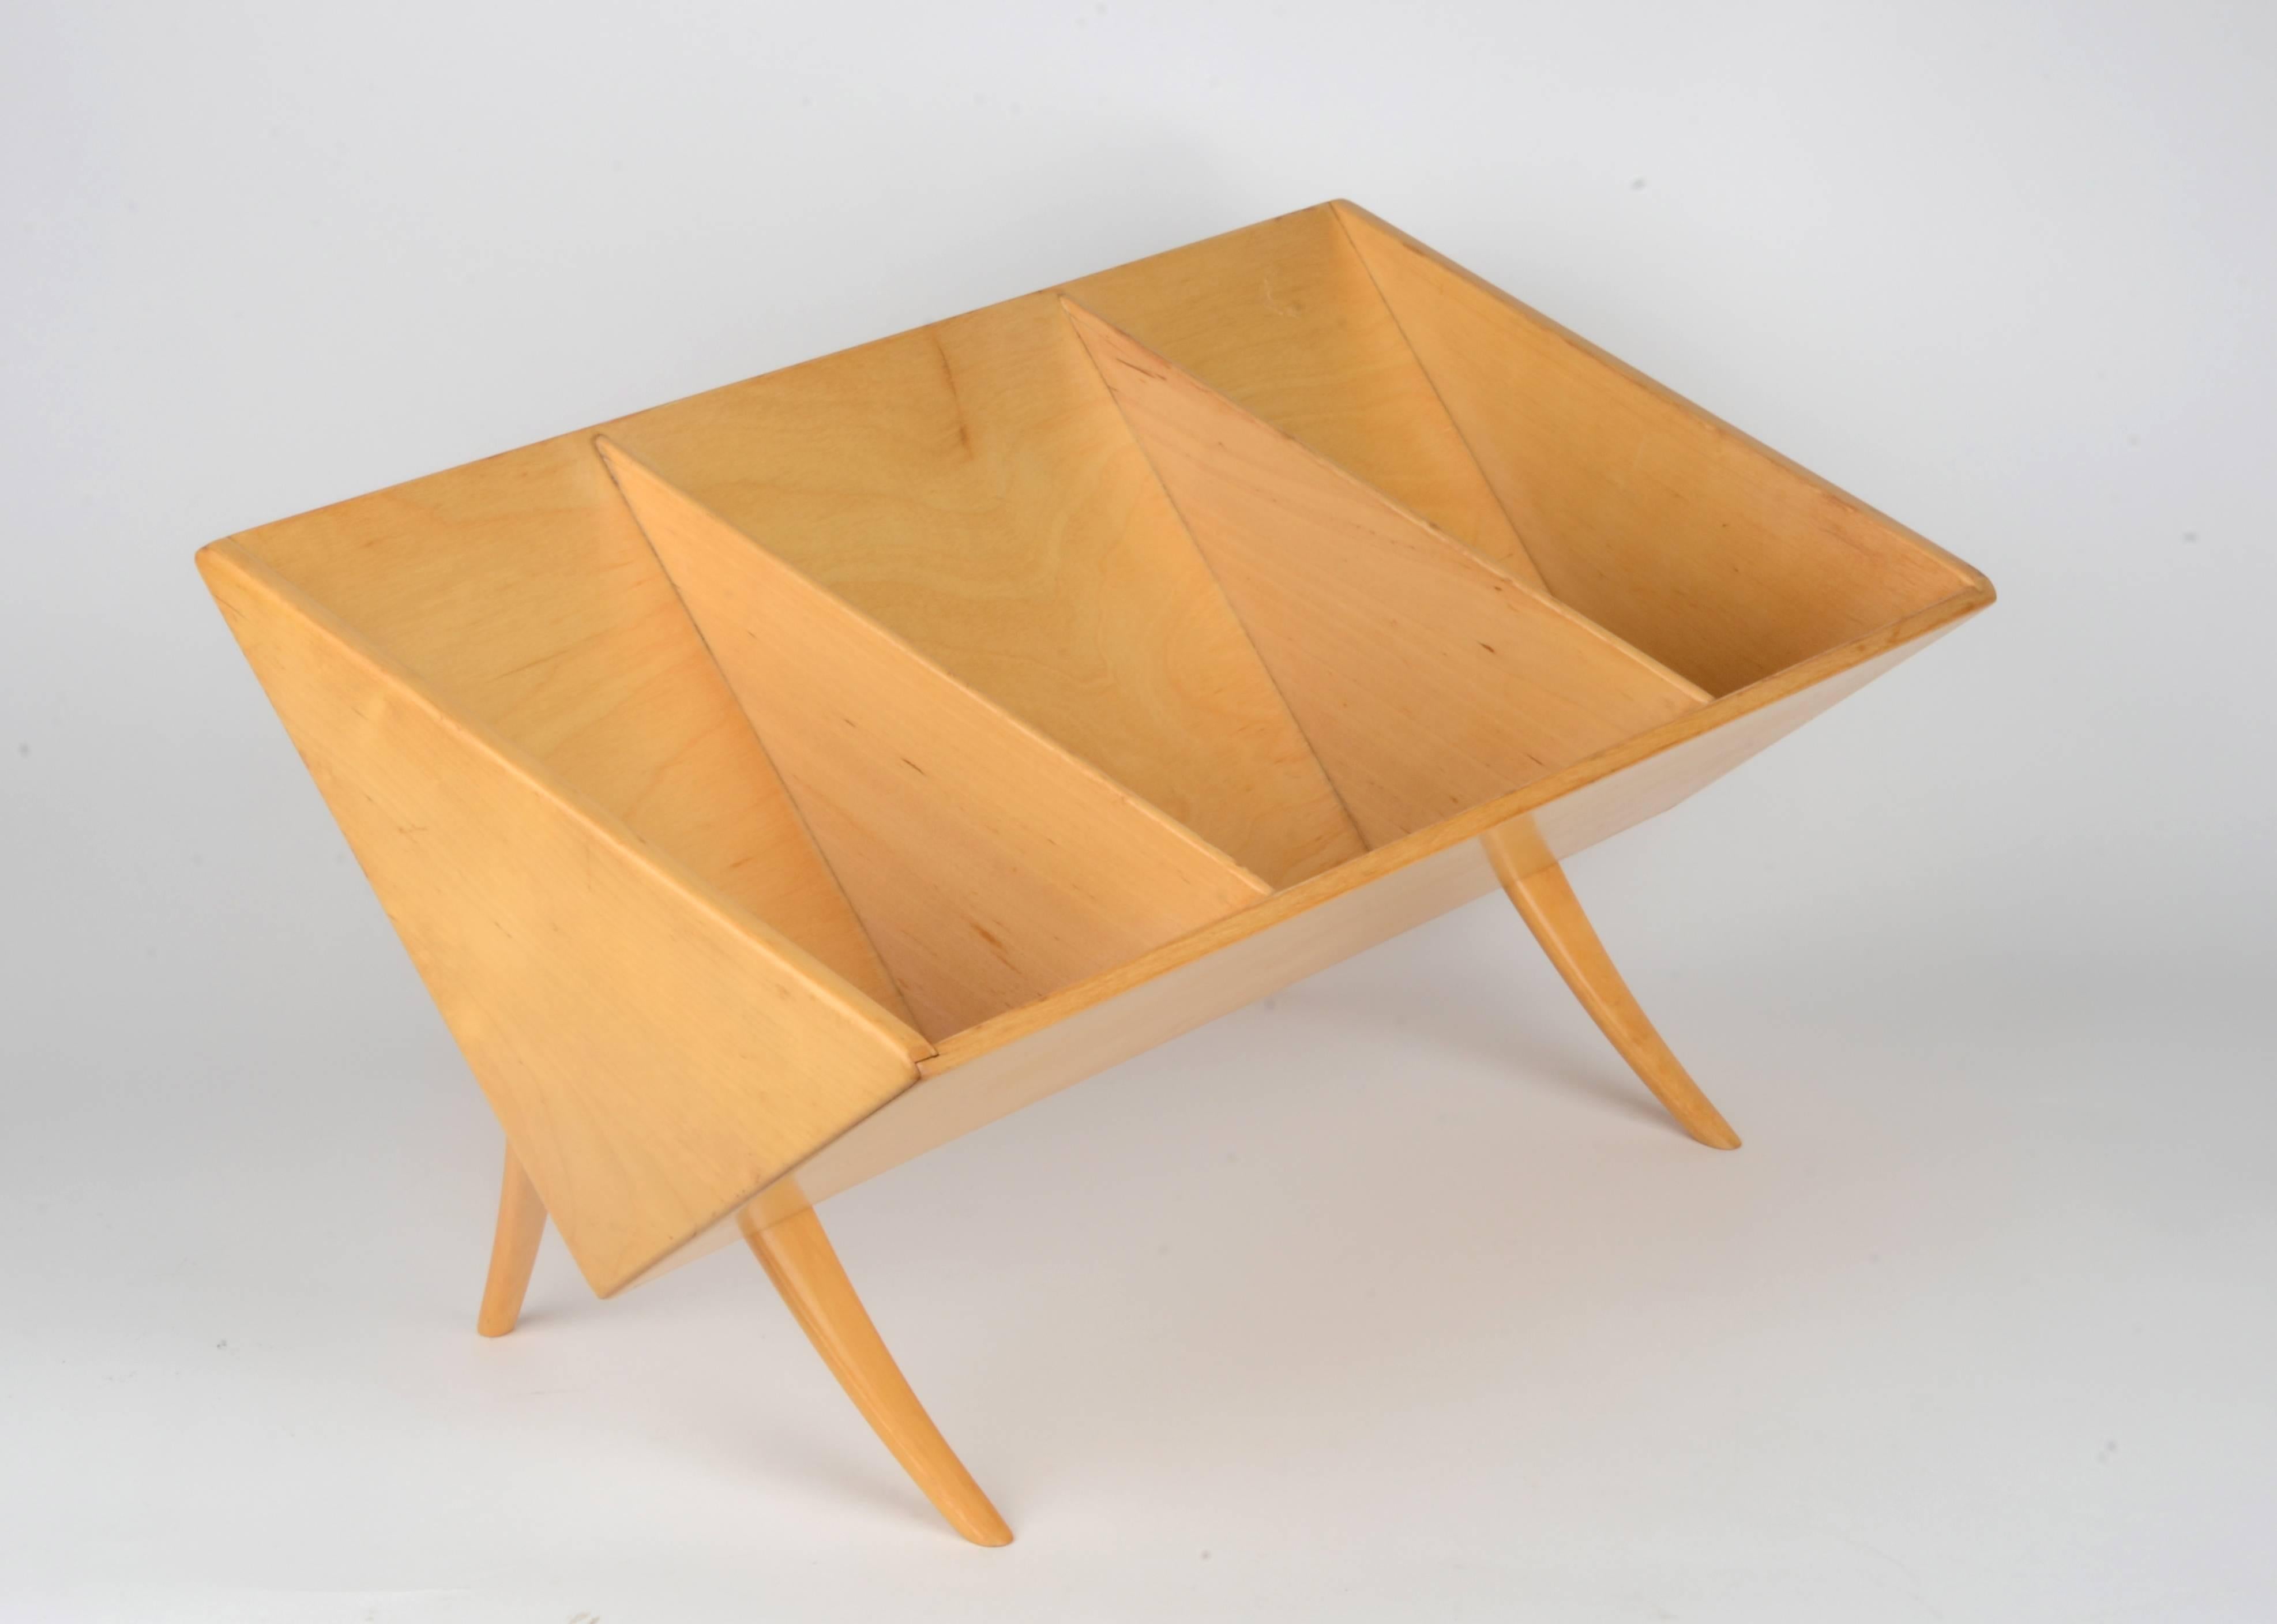 Book crib designed by Bruno Mathsson for Firma Karl Mathsson, in 1941. In beech, this example is from the 1960s.